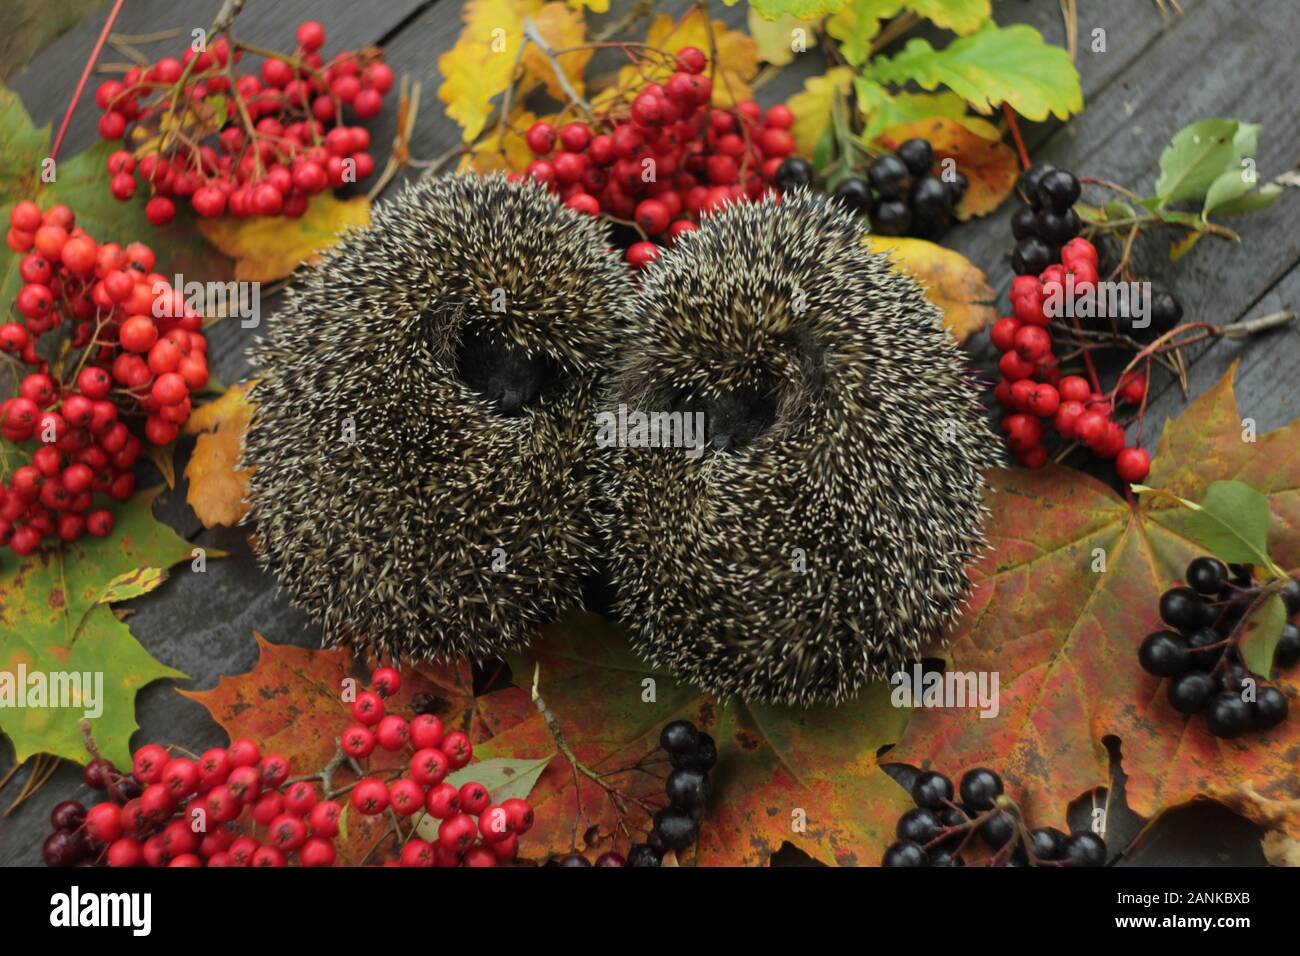 Two hedgehogs rolled up into ball with autumn leaves and Berrys Stock Photo